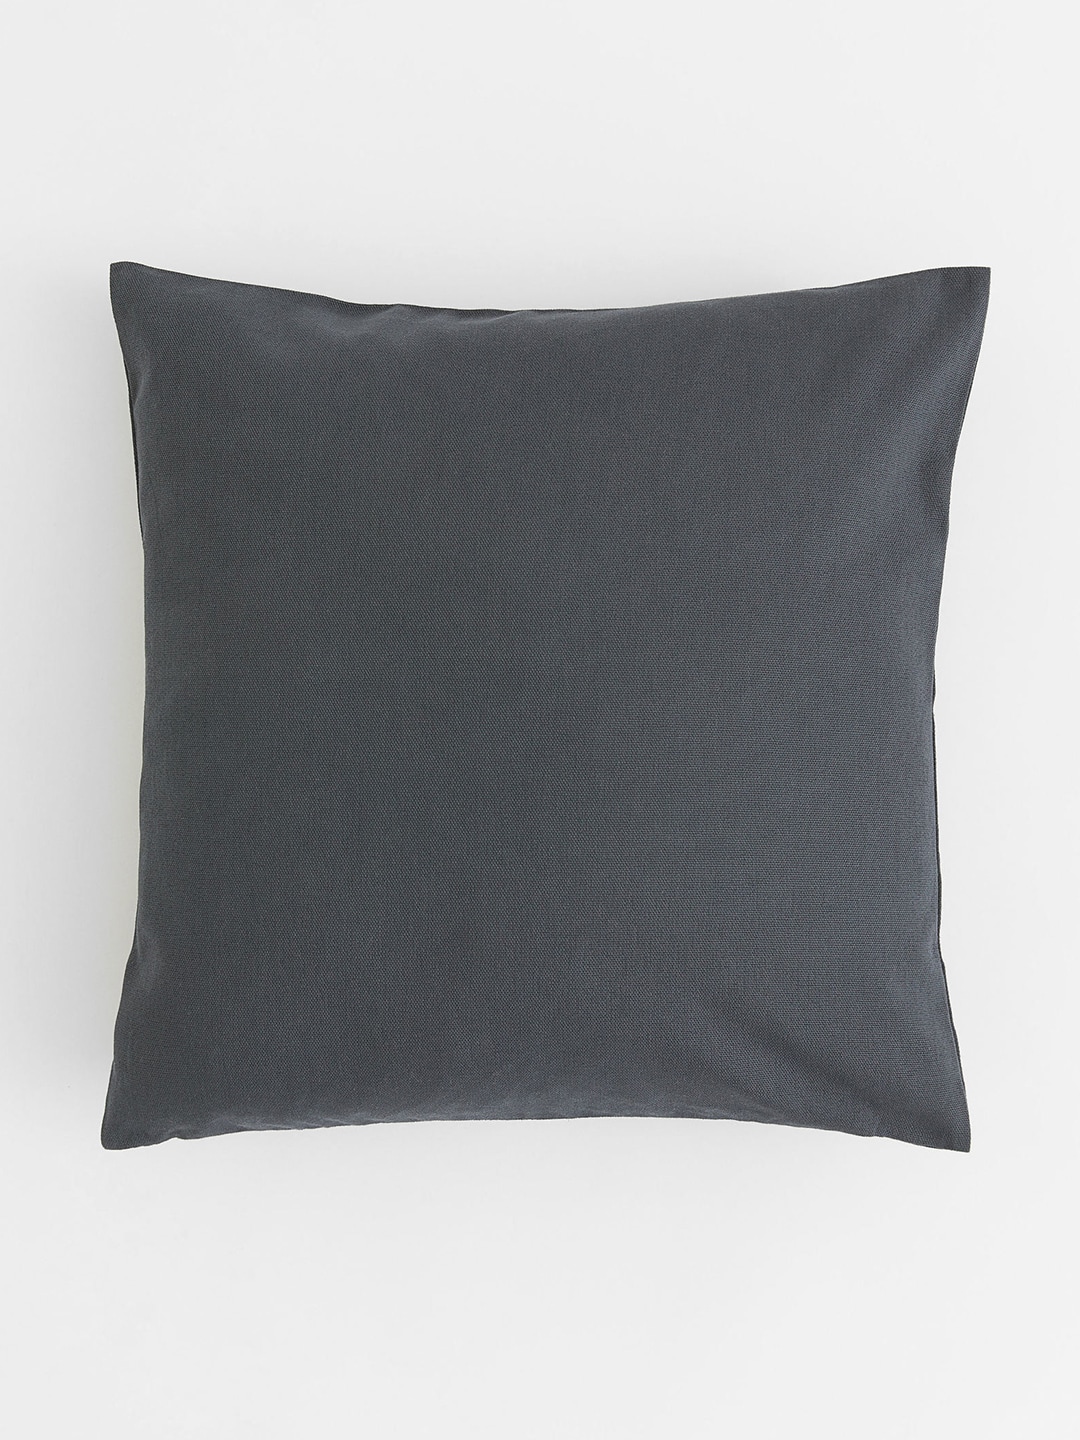 H&M Grey Cotton Canvas Cushion Cover Price in India